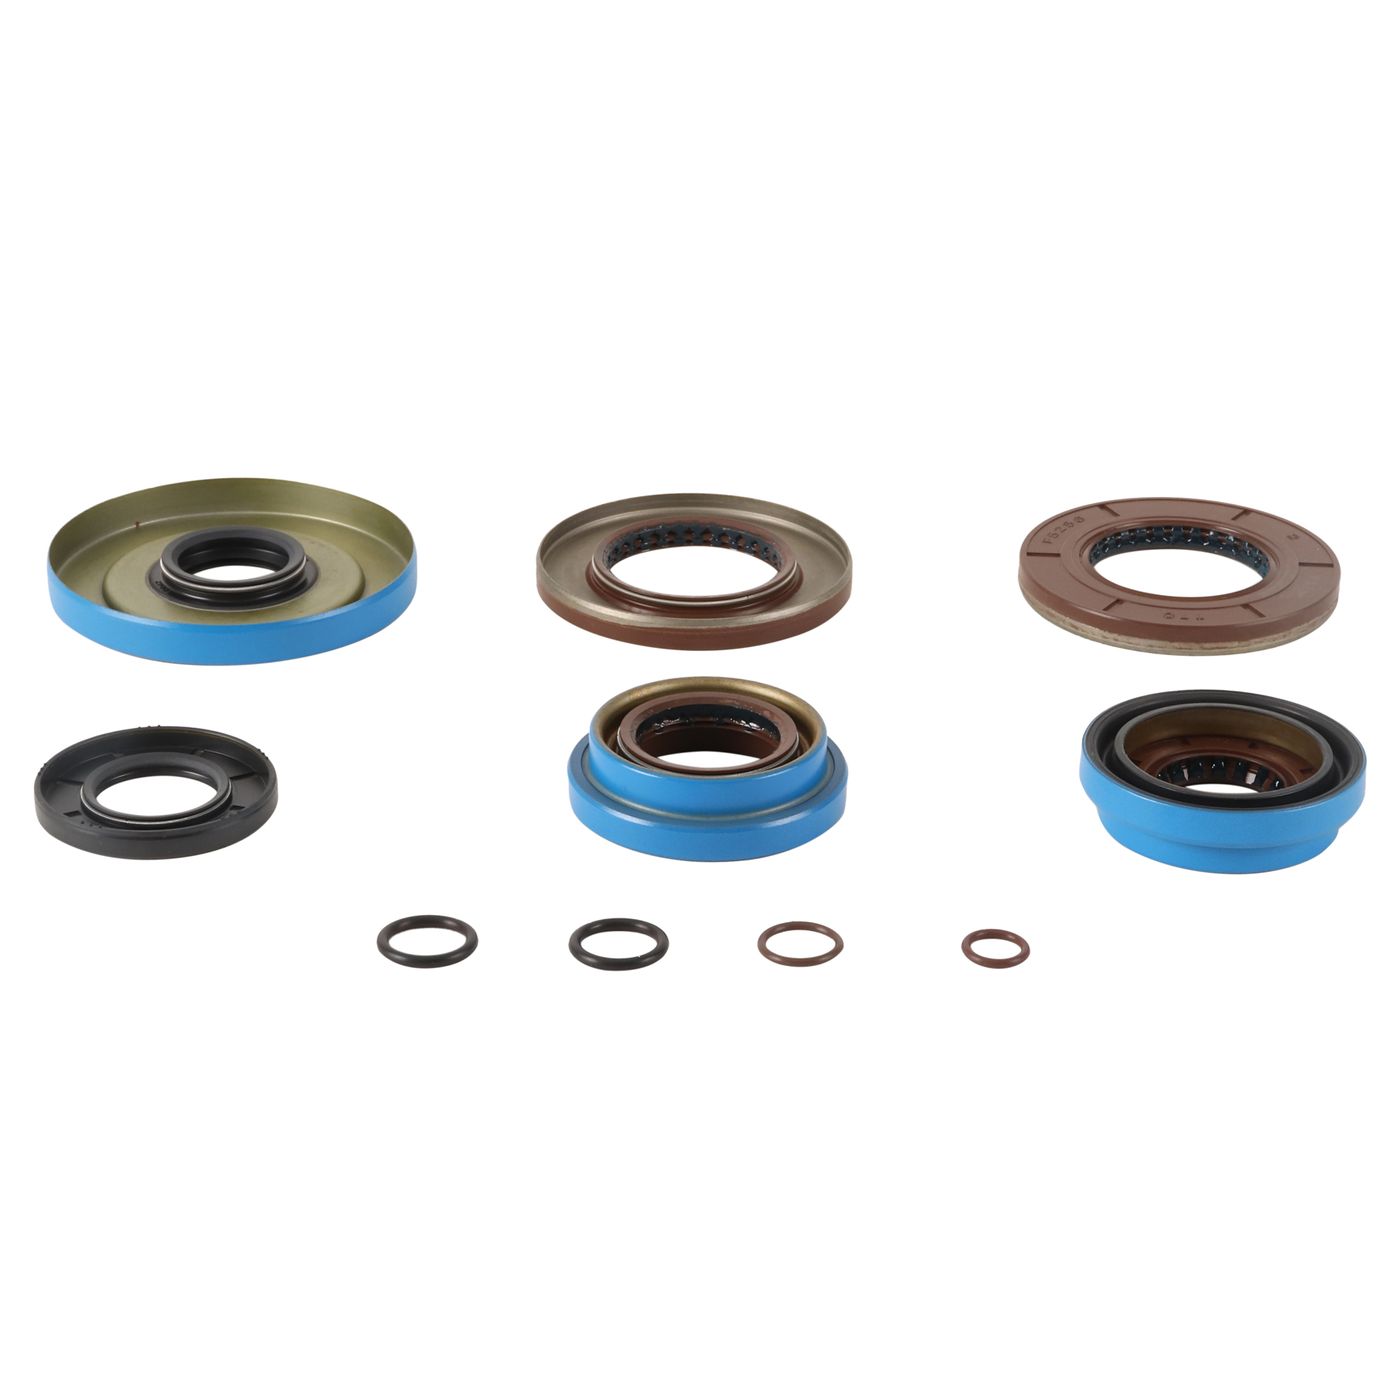 Wrp Diff Seal Kits - WRP252126-5 image